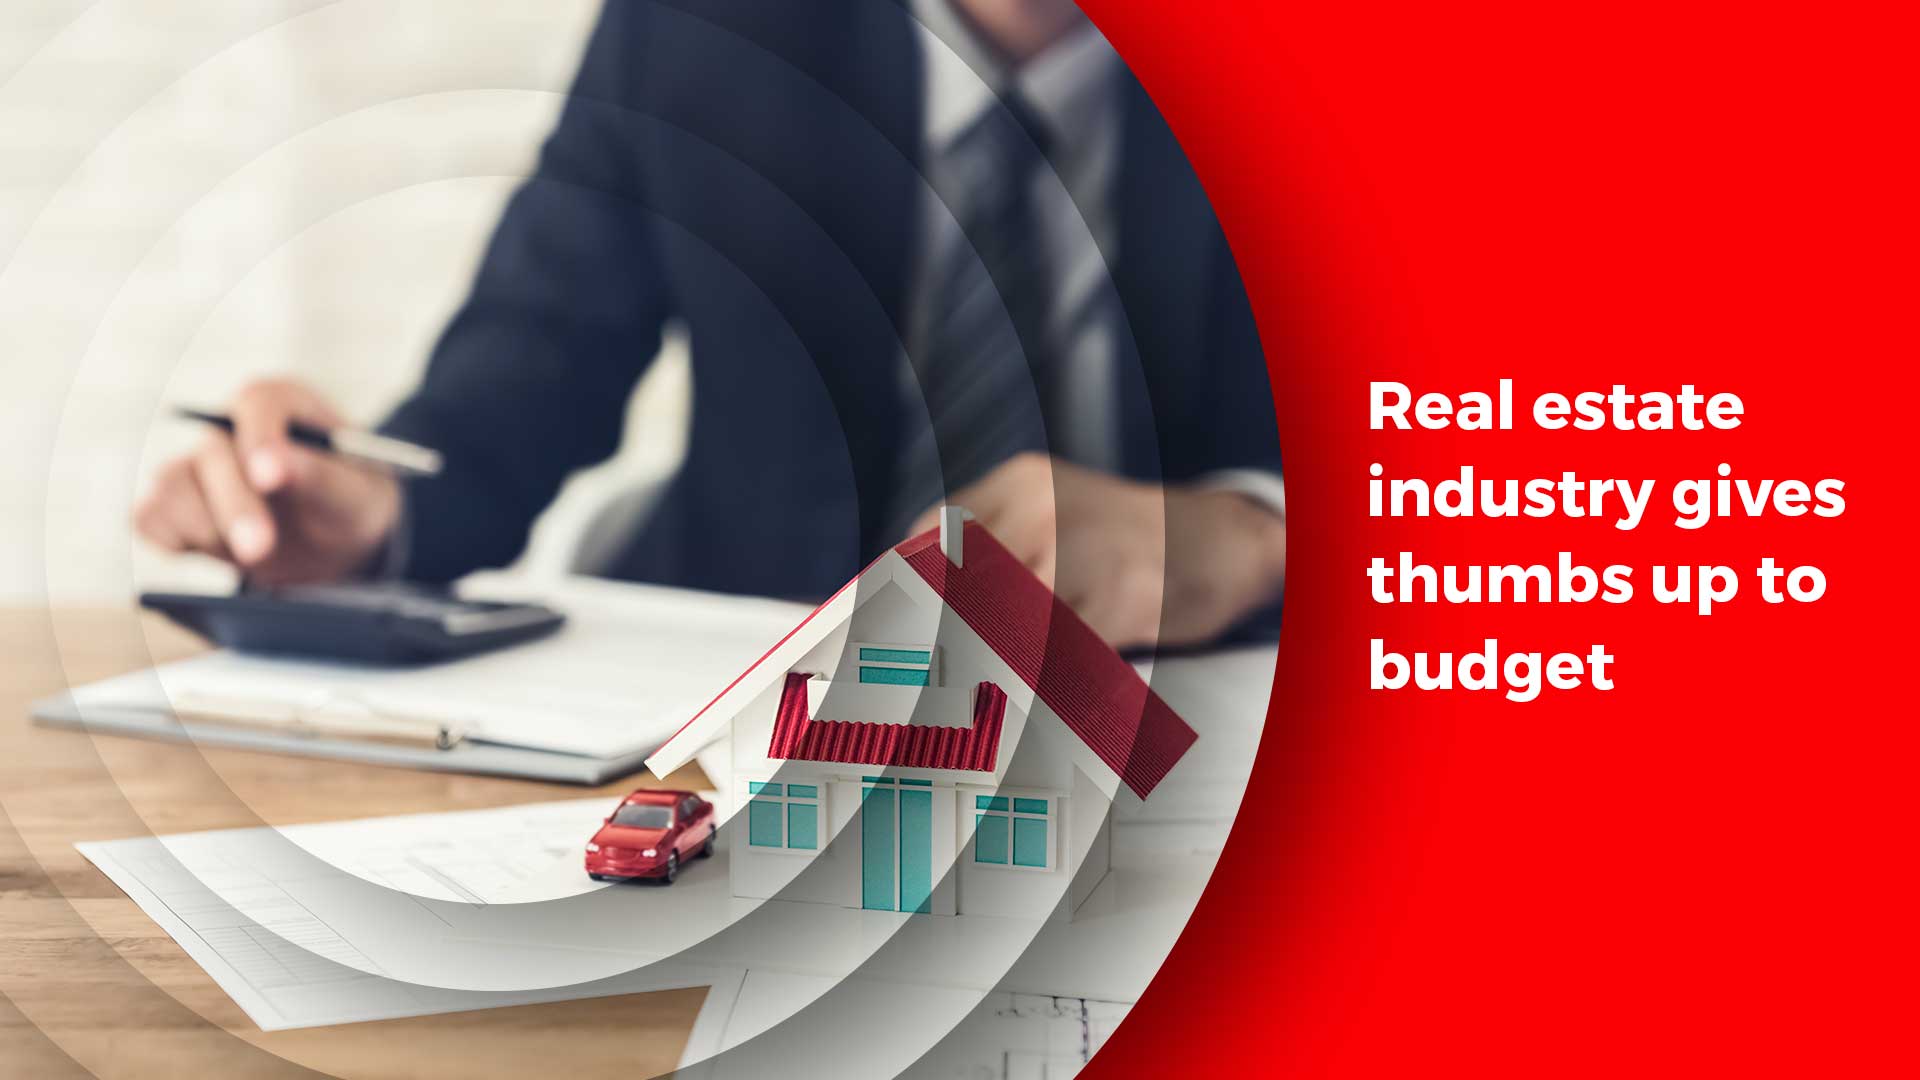 Builders Welcome The Provisions Of Interim Budget 2019-2020